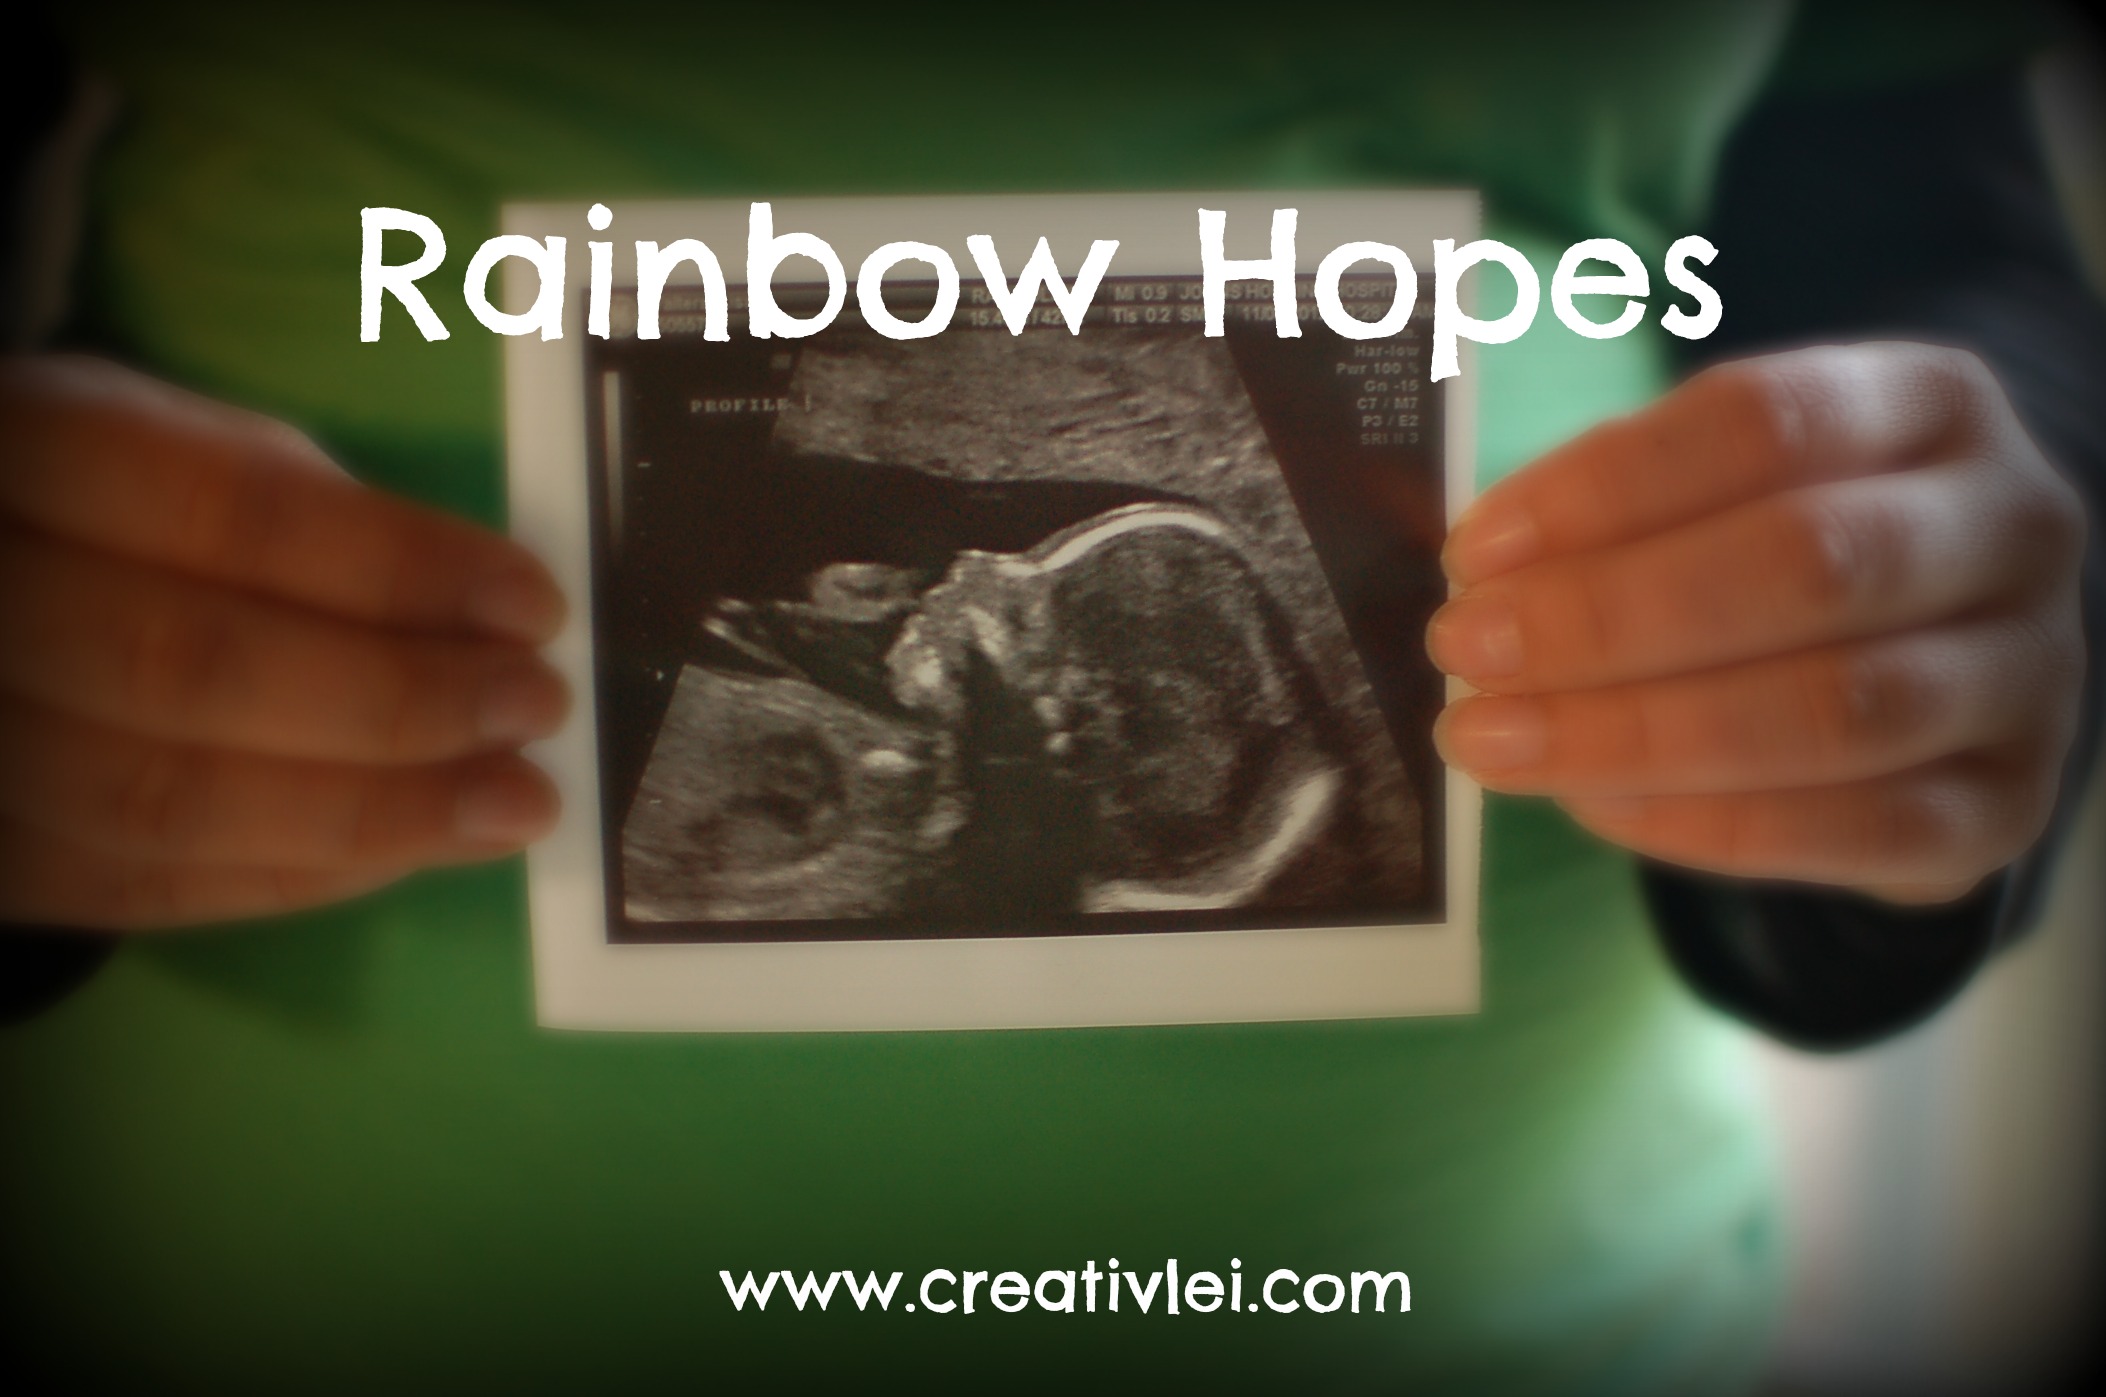 Hoping for our Rainbow Baby…